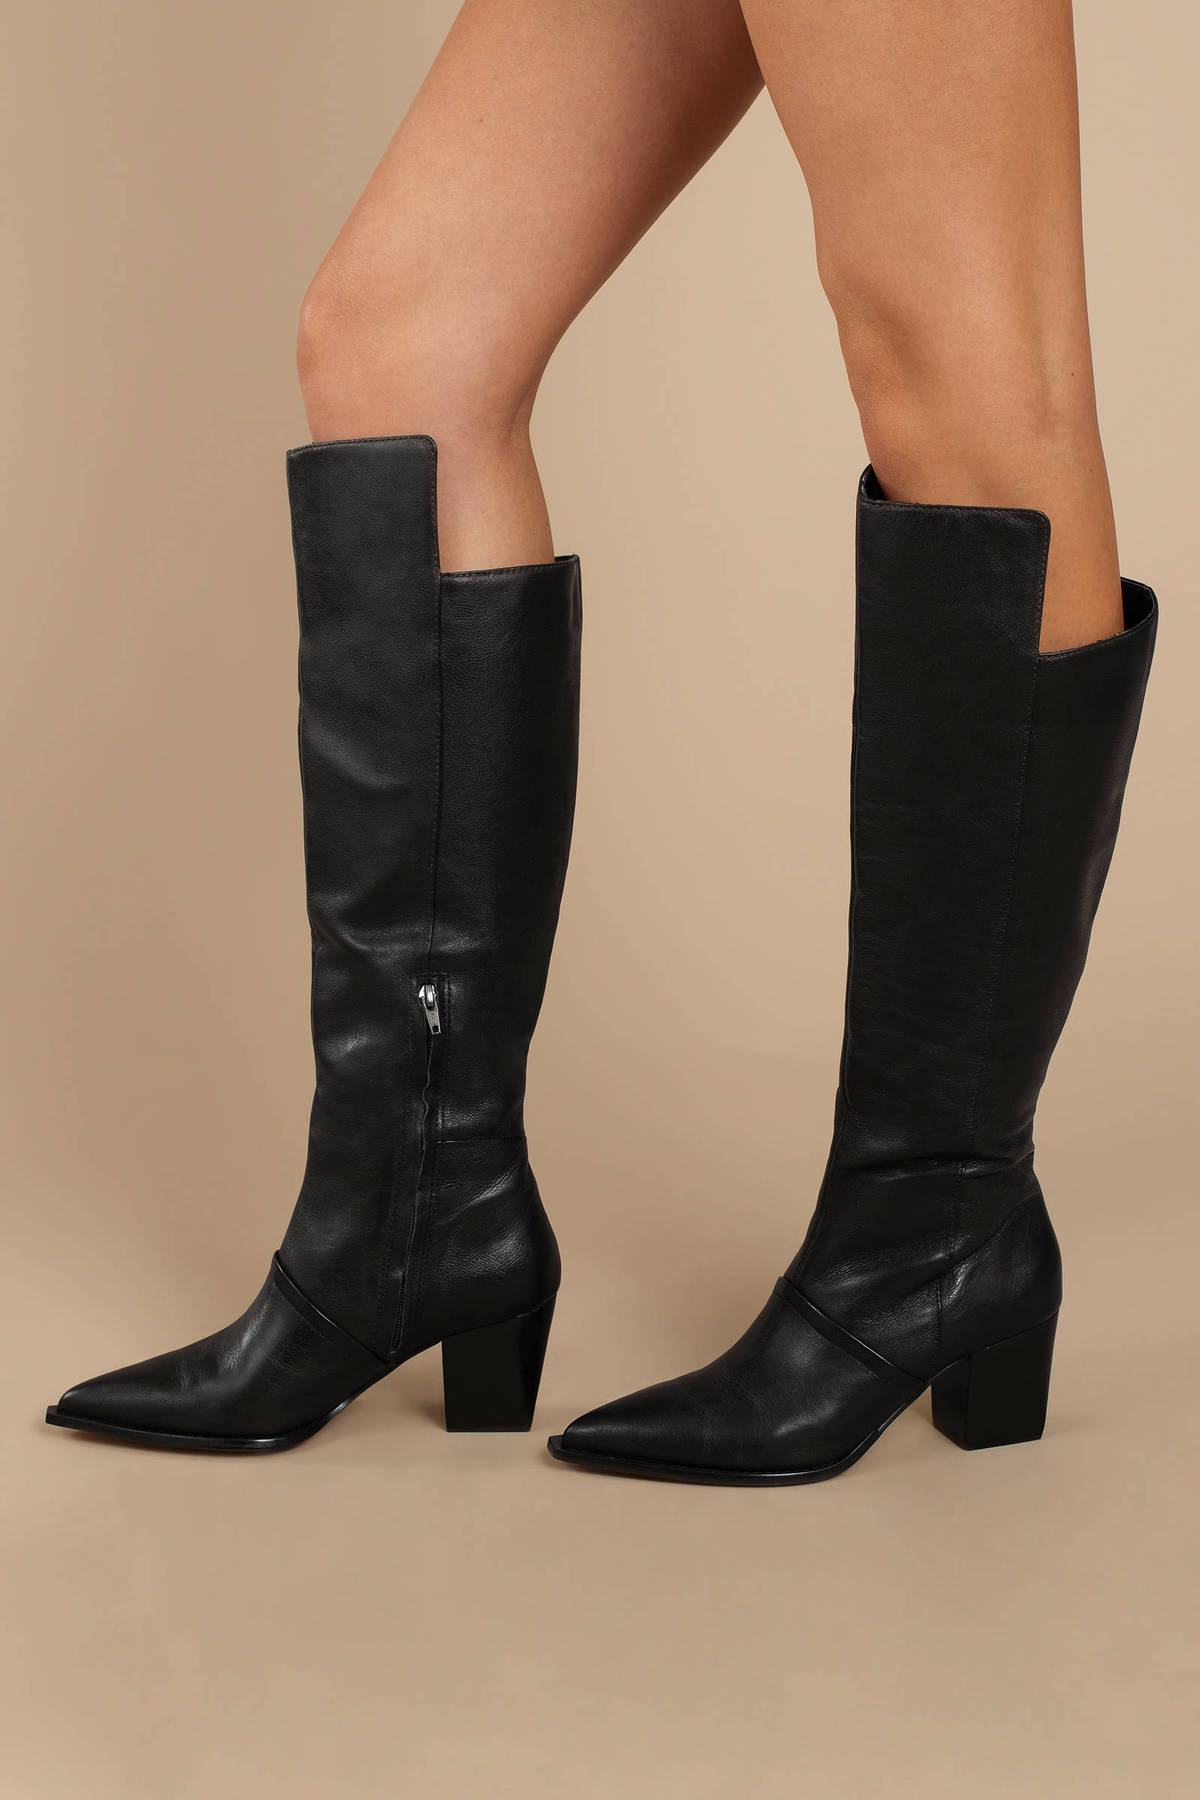 Black Boots - Leather Pointed Toe Boots - Knee High Boots